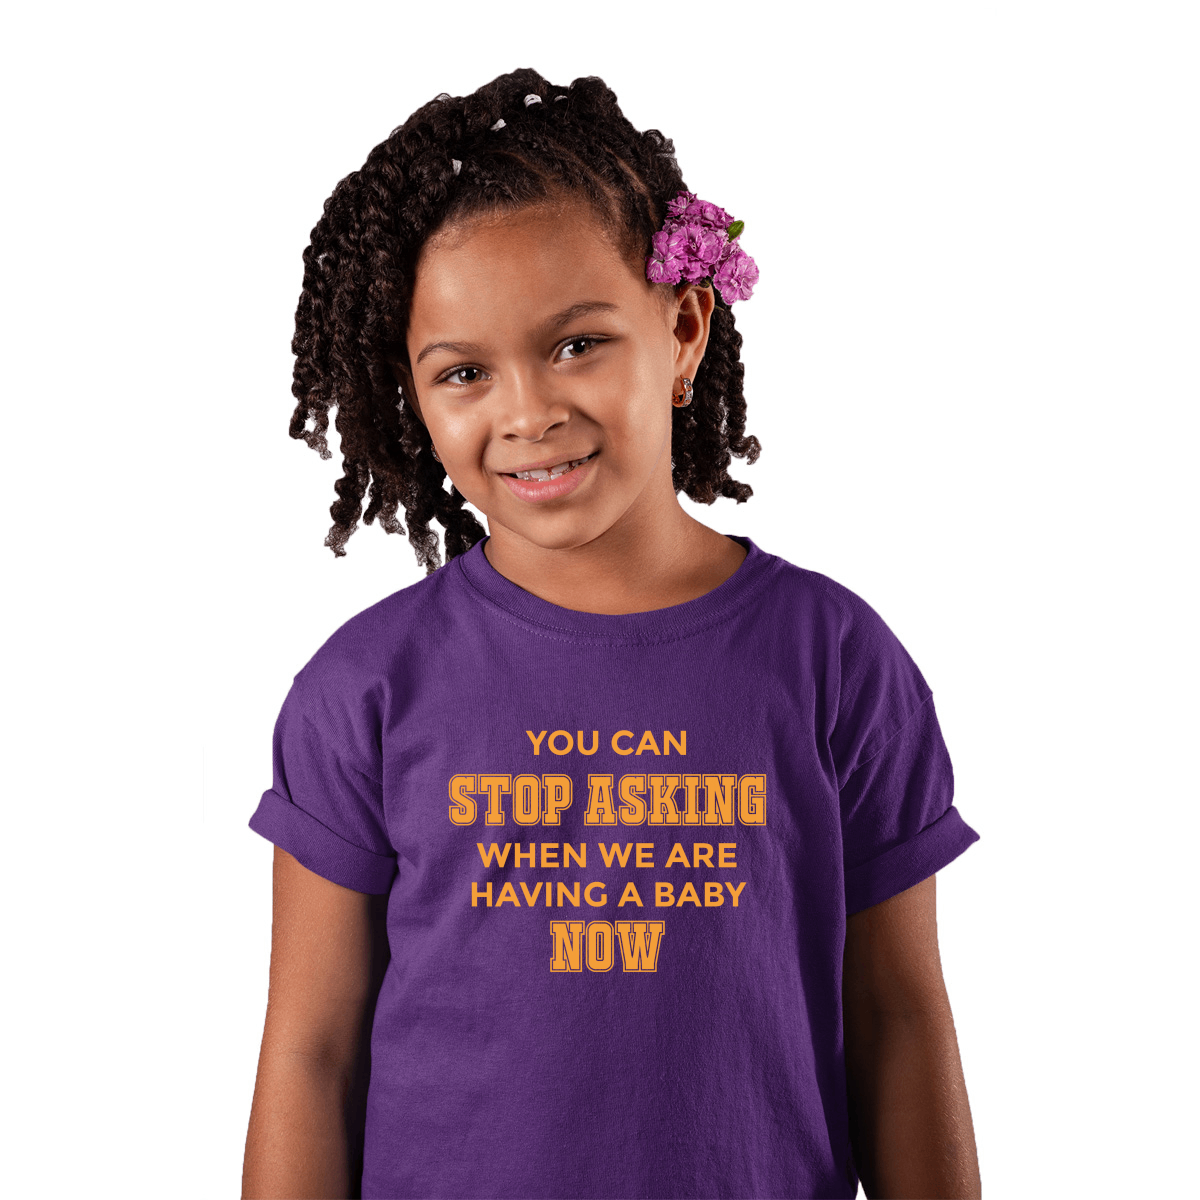 You can stop asking when we are having baby NOW Kids T-shirt | Purple